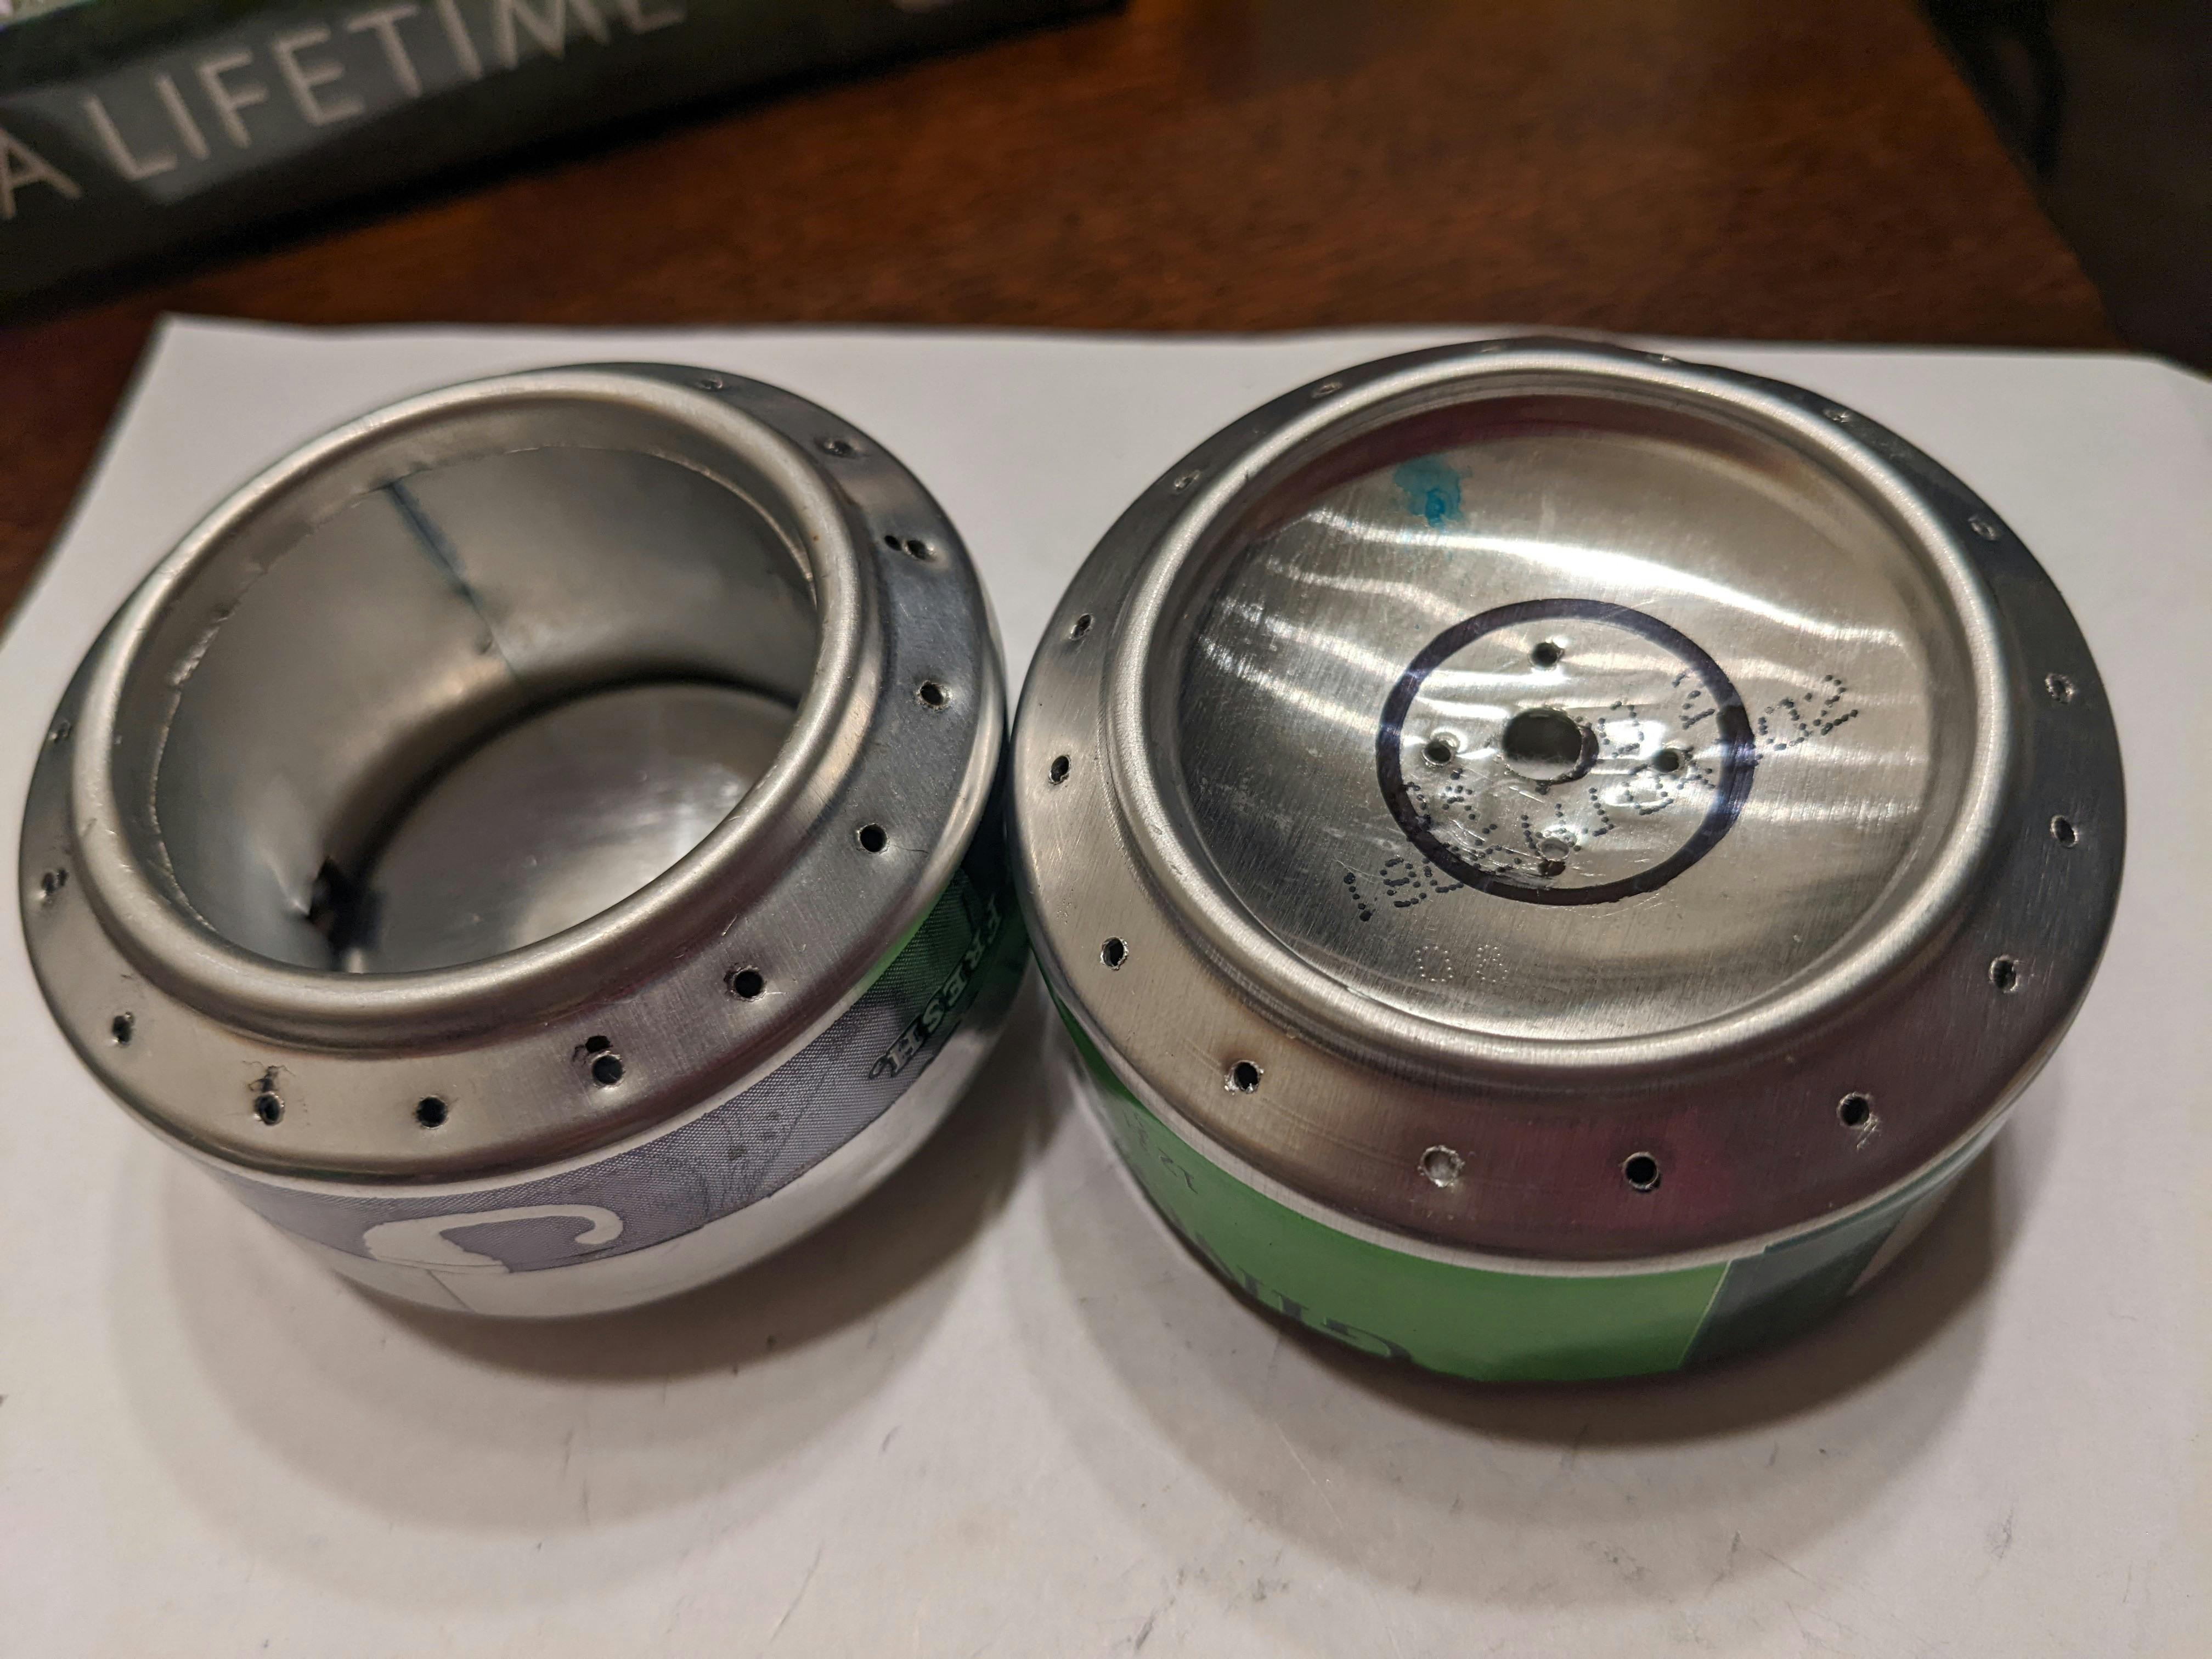 Two different can designs constructed by the author. 